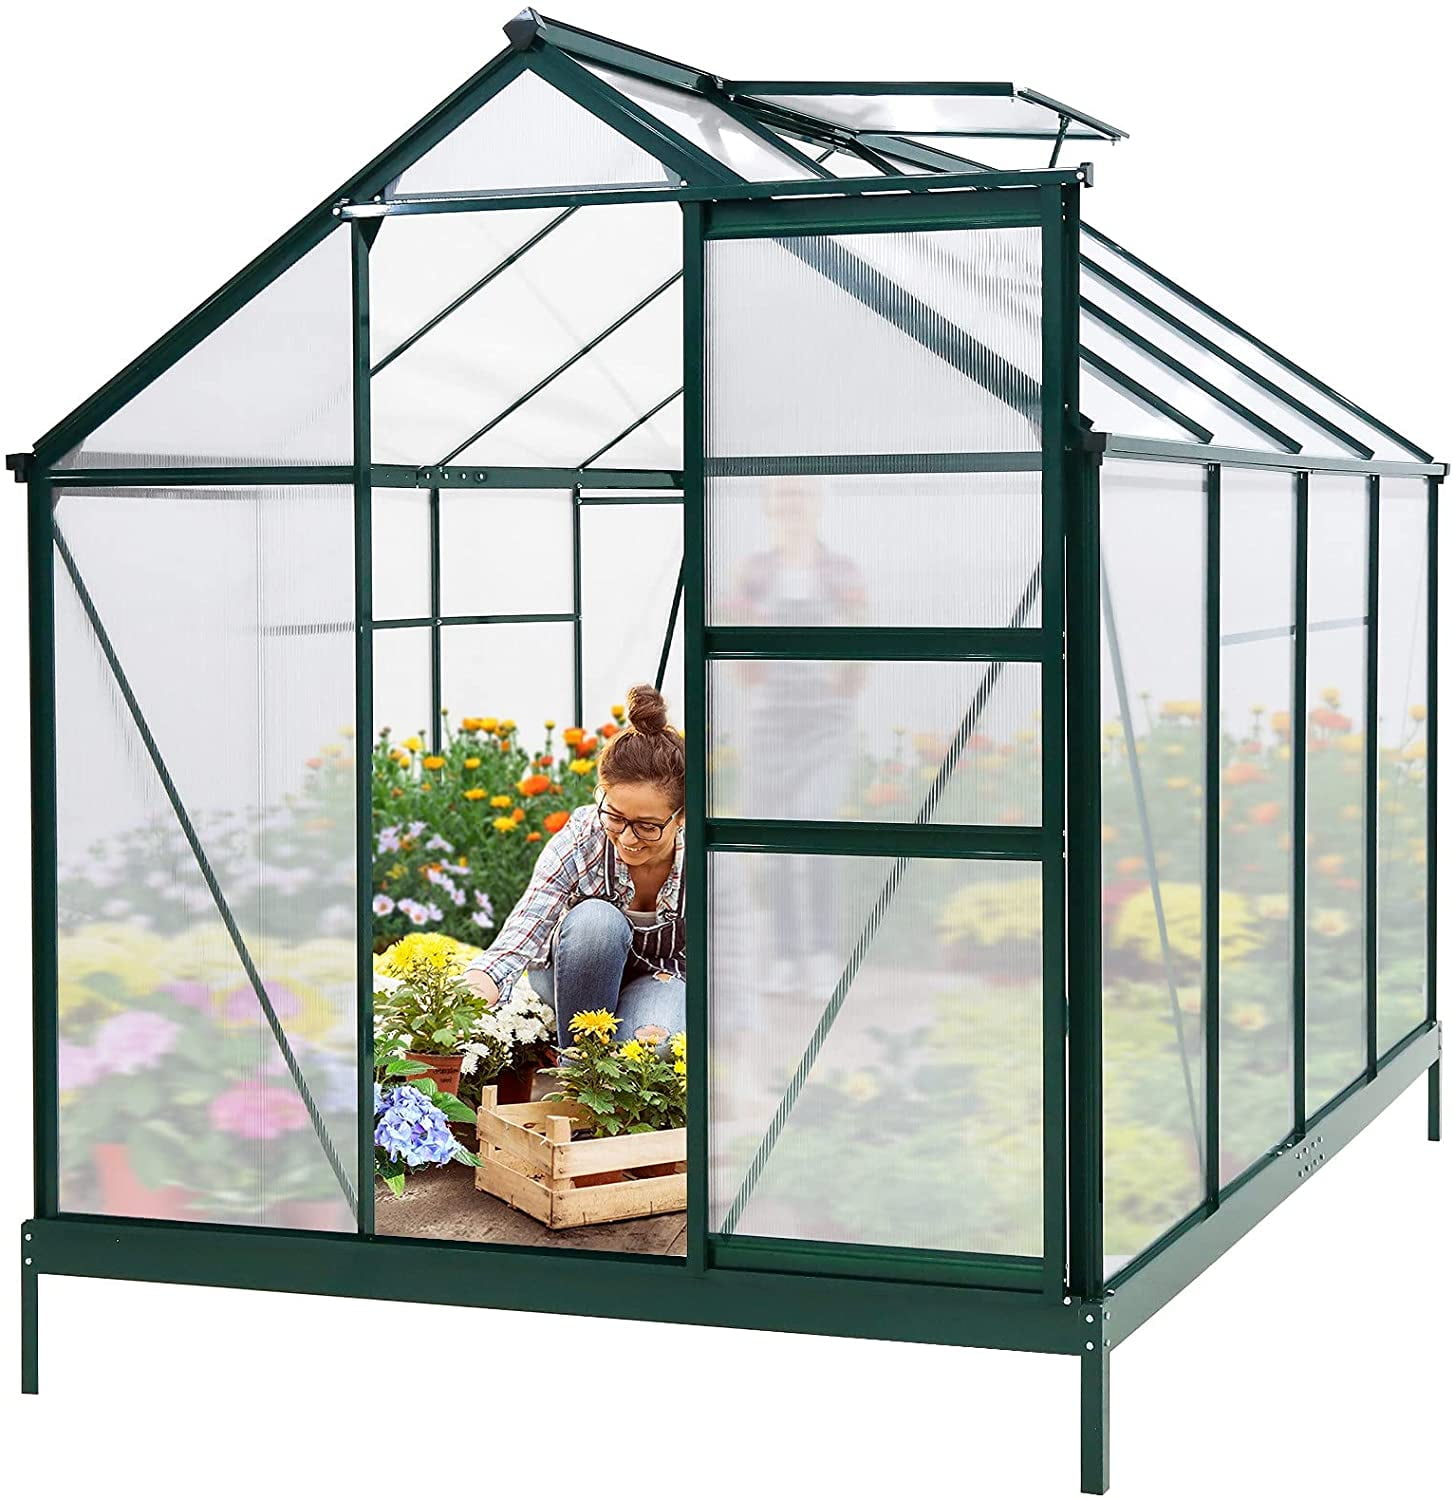 4HOMART Outdoor Green House 13x7x7 Walk-in Greenhouse with PE Cover,Strong Metal Frame,8 Windows and 1 Door with Roll-Up Zipper Door Plant Garden Green House